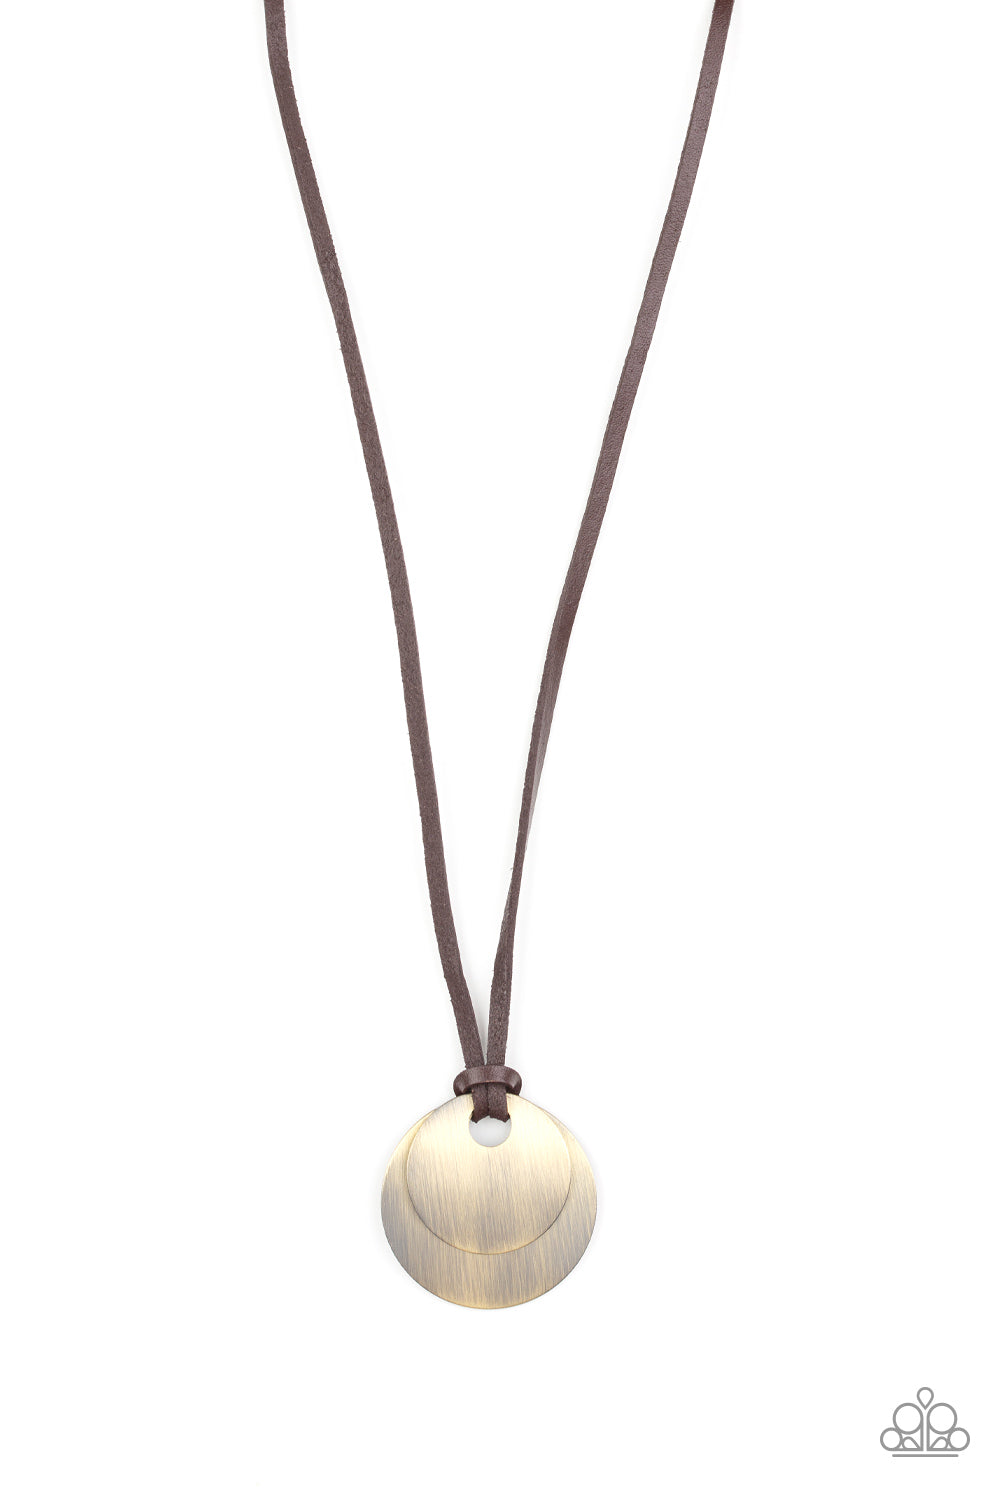 CLEAN SLATE - BRASS AND LEATHER NECKLACE